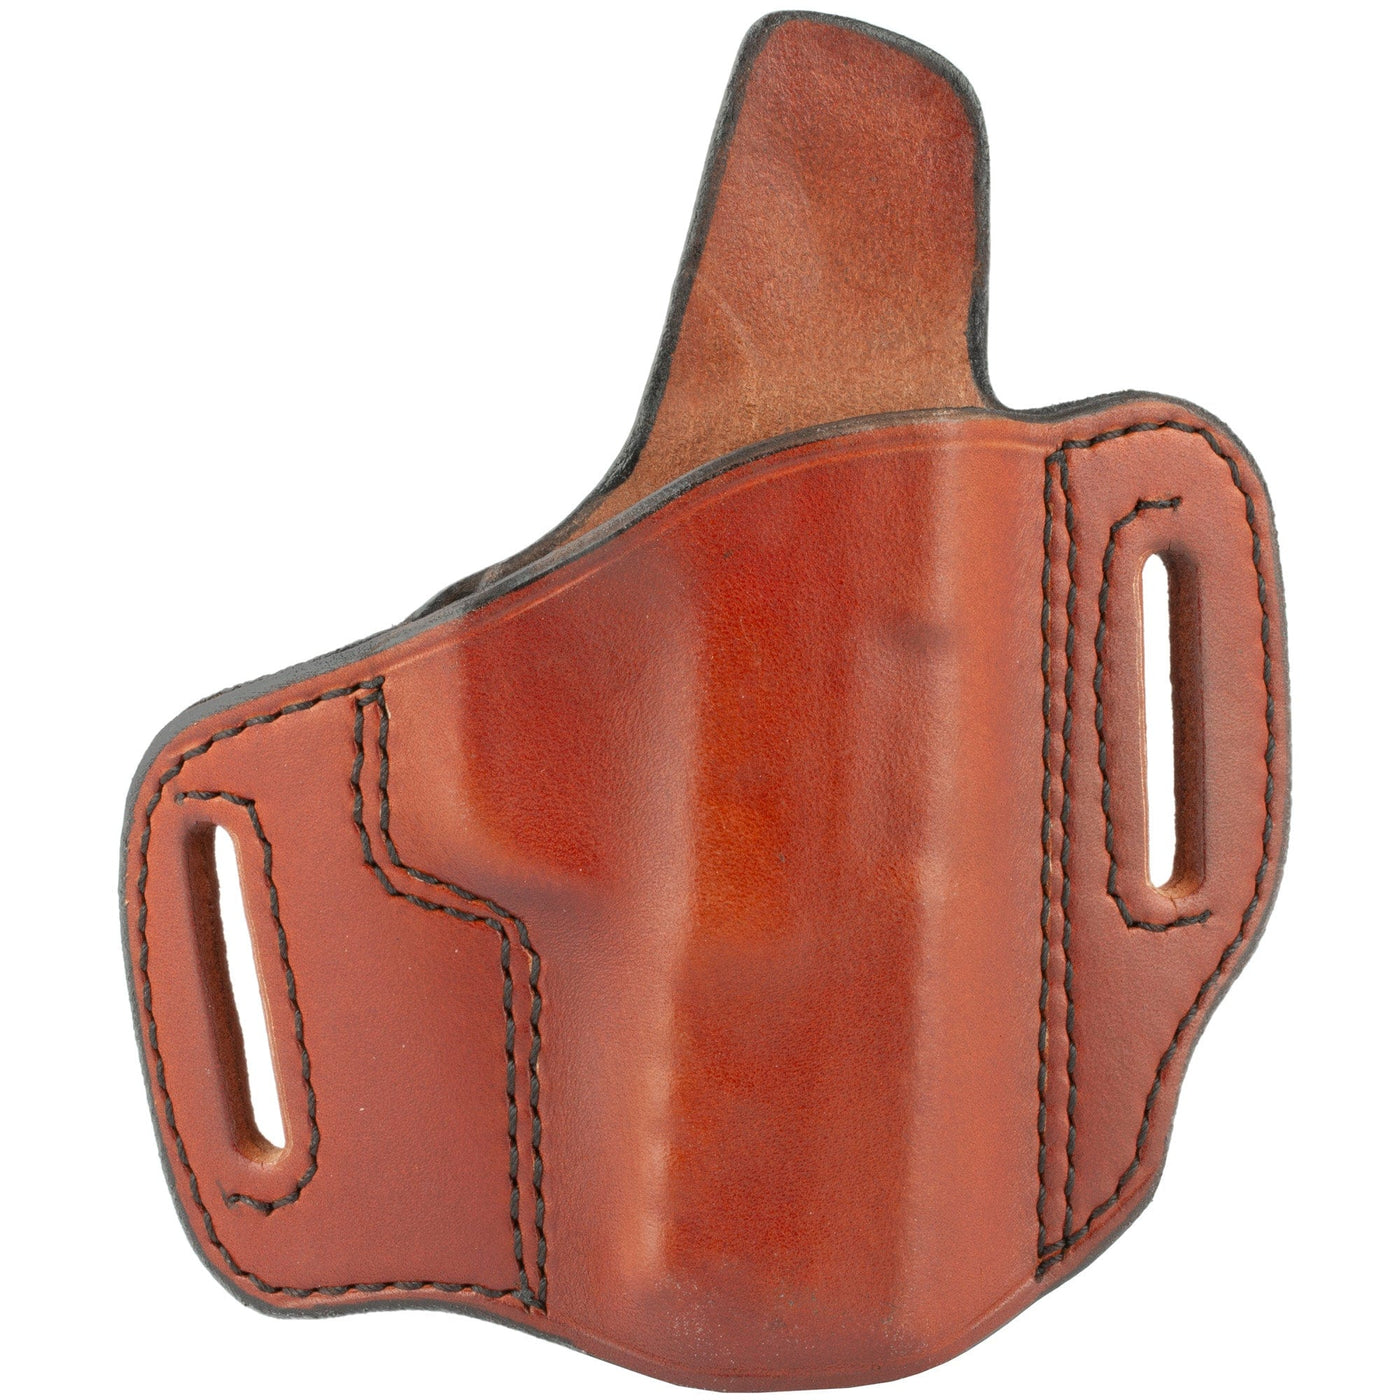 Don Hume D Hume 721ot Sw M&p Shield Ez Rh Brown Holsters